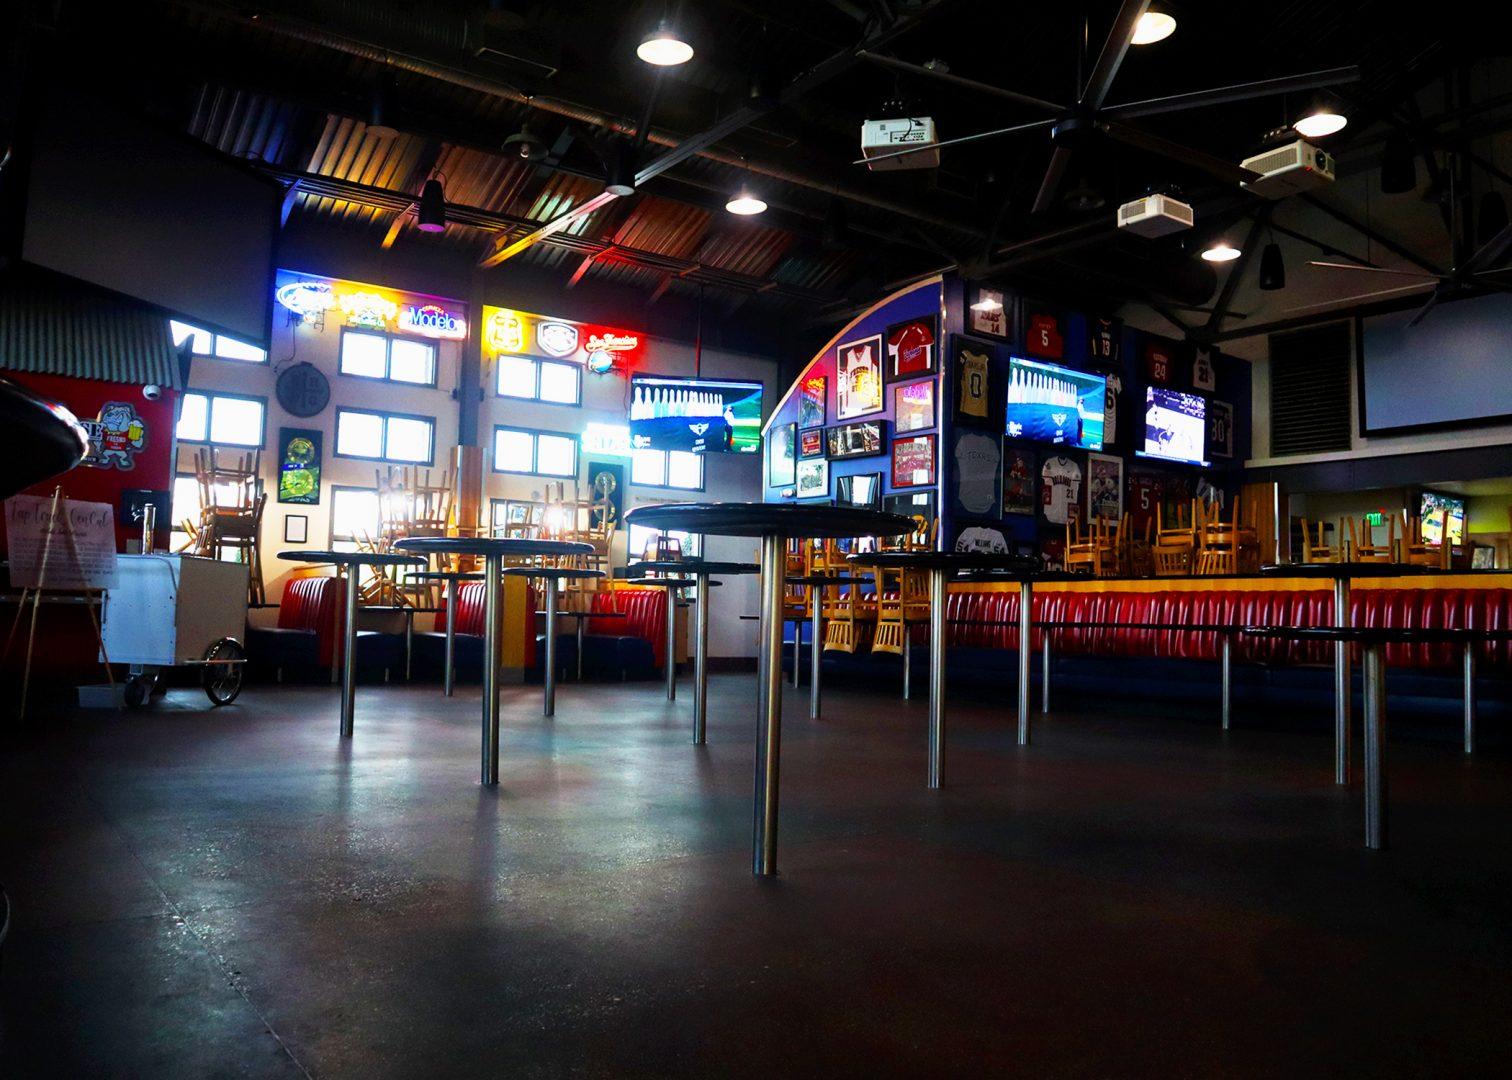 Dog House Grill sits vacant of indoor dining patrons due to the COVID-19 pandemic. (Kameron Thorn/The Collegian)